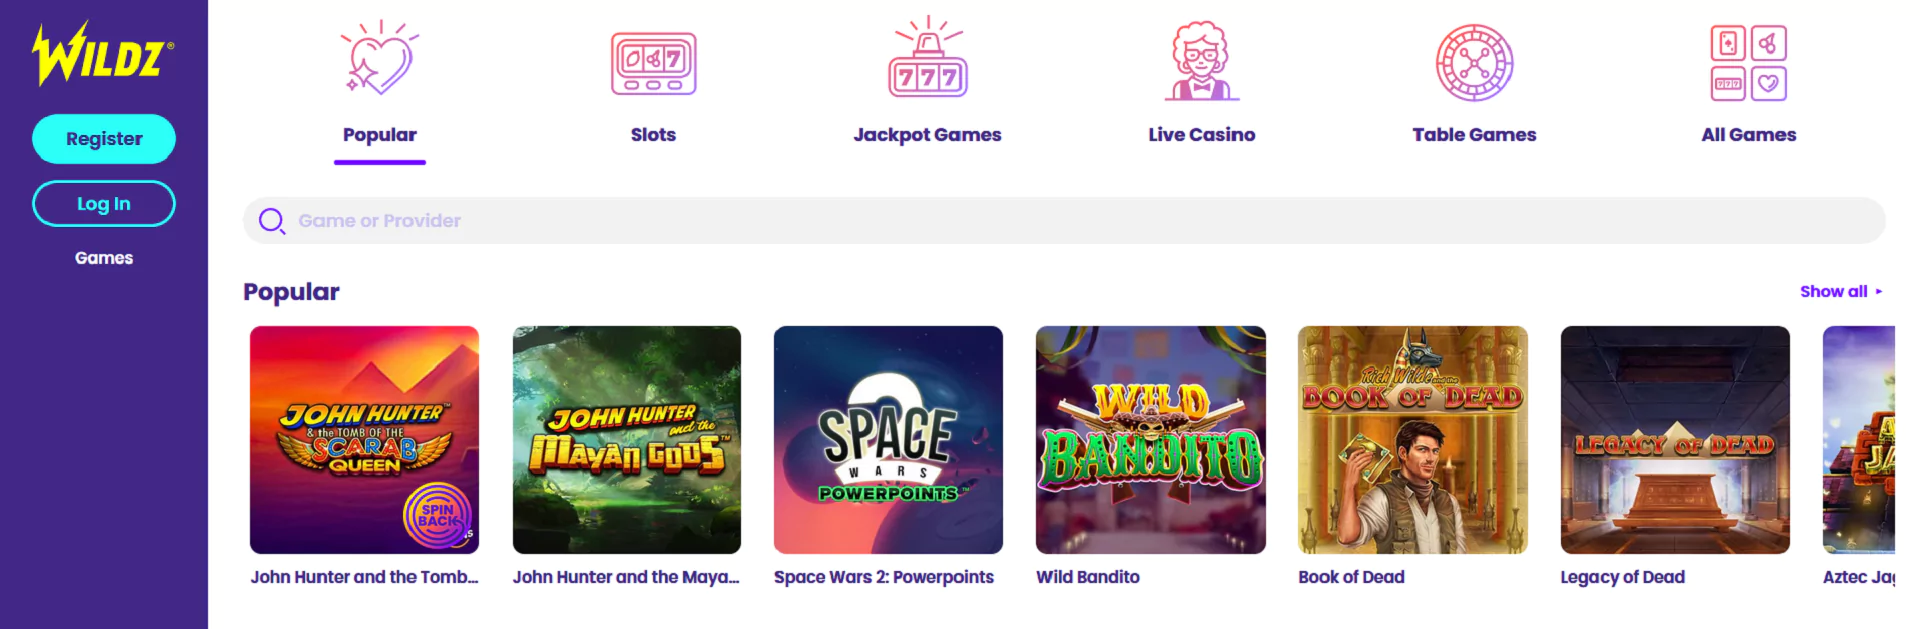 Screenshot of the variety of games from the Montreal online casino - Wildz website